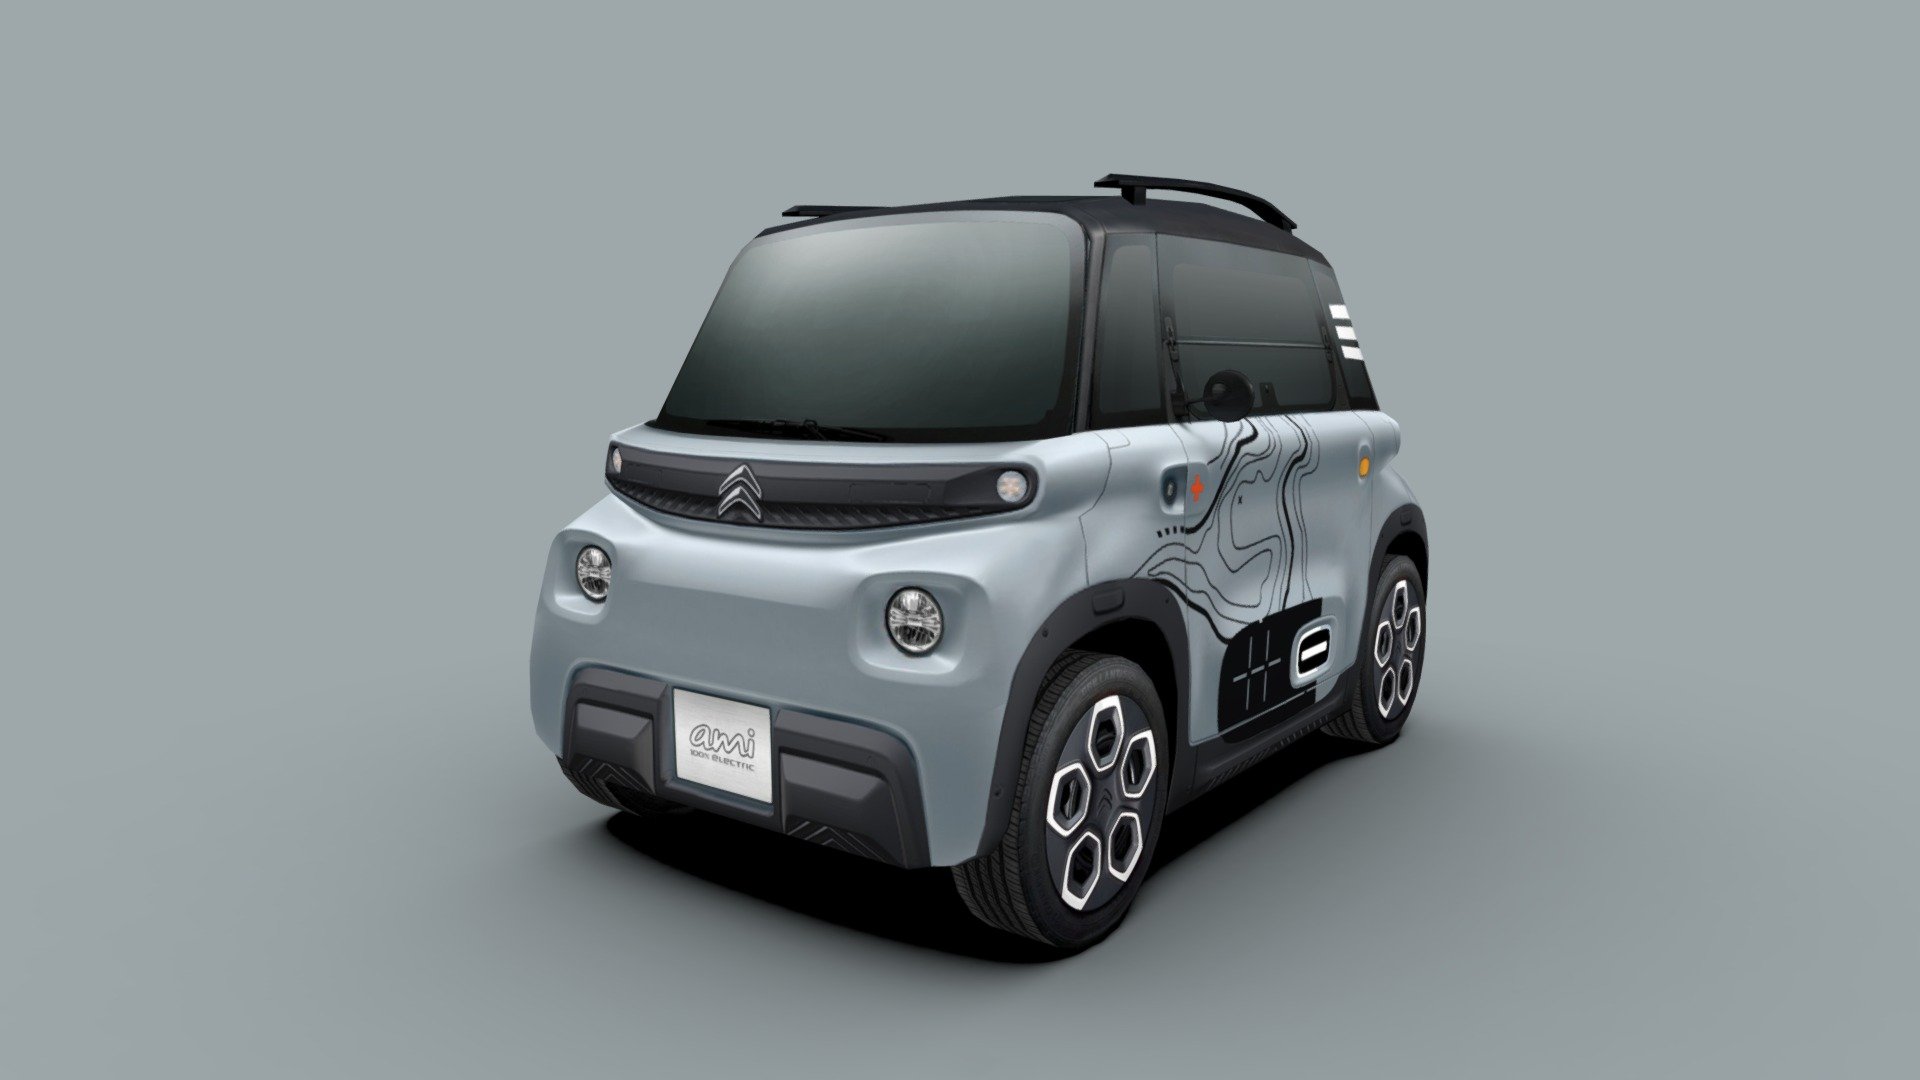 The 2020 Citroen Ami is an electric microcar for a new urban mobility.

Vibe is the Ami version with more upscale, chic and graphic accessories that incorporate roof trims.

The simple, young, friendly and technological image of the Ami are the guarantee that this 3D model easily adapts to any type of environments and design projects

The 3d is very low-poly, full-scale, real photos texture (single 2048 x 2048 png).

Package includes 5 file formats and texture (3ds, fbx, dae, obj and skp)

Hope you enjoy it.

José Bronze - 2020 Citroen Ami Vibe - Buy Royalty Free 3D model by Jose Bronze (@pinceladas3d) 3d model